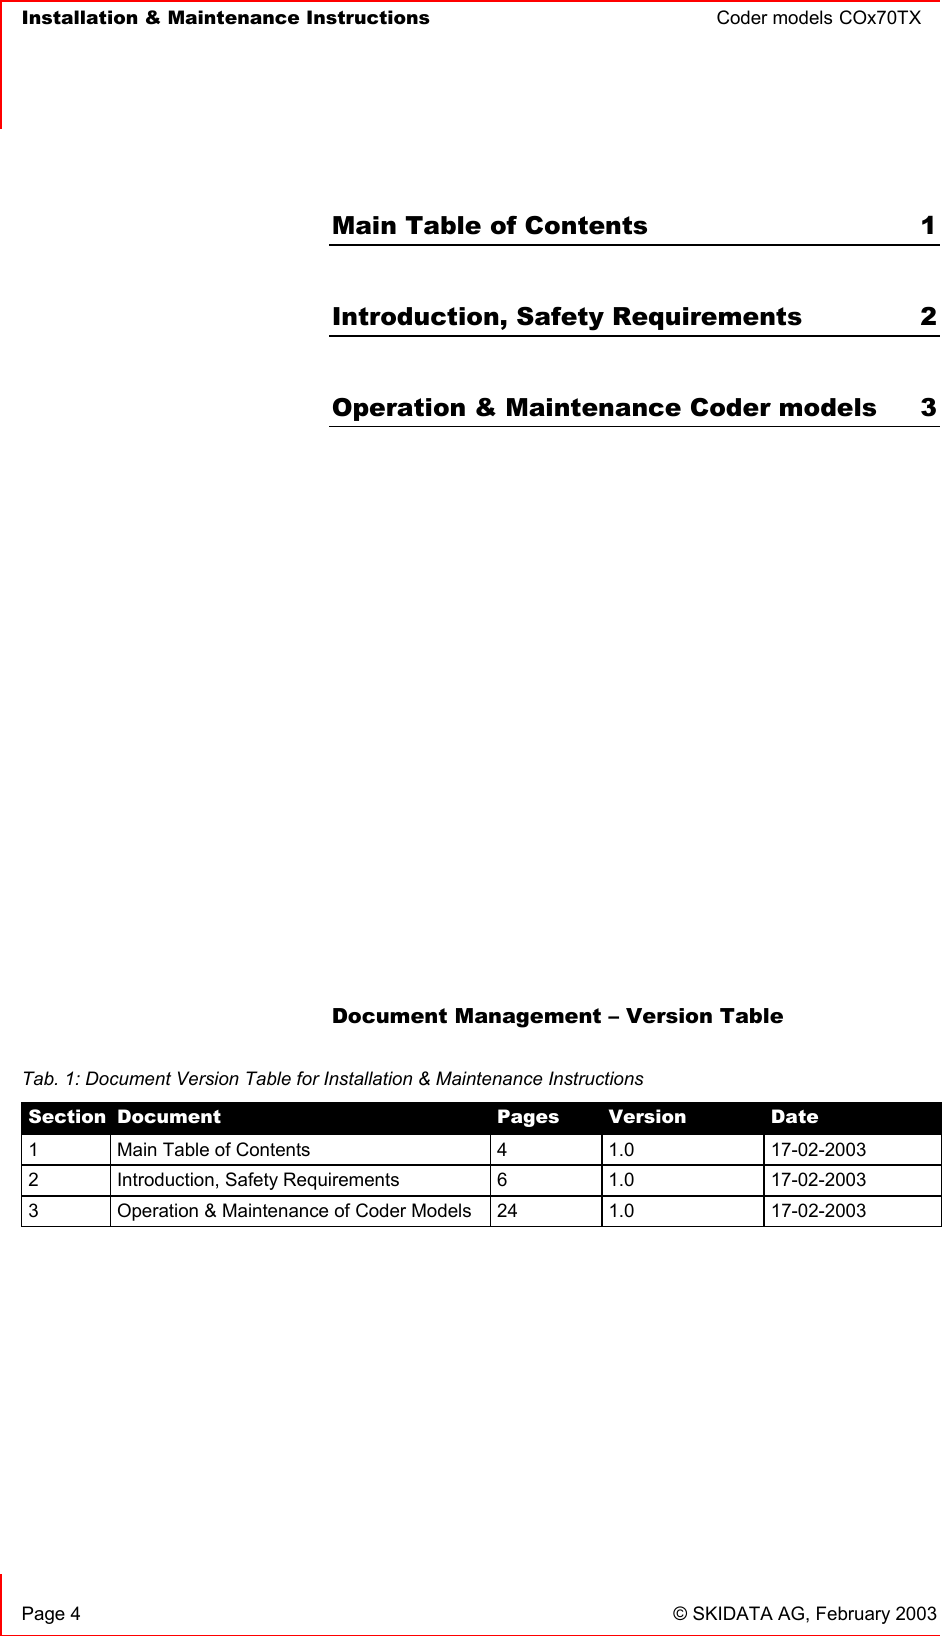   Installation &amp; Maintenance Instructions  Coder models COx70TX       Page 4  © SKIDATA AG, February 2003 Main Table of Contents  1  Introduction, Safety Requirements  2  Operation &amp; Maintenance Coder models  3            Document Management – Version Table   Tab. 1: Document Version Table for Installation &amp; Maintenance Instructions Section  Document  Pages  Version  Date 1  Main Table of Contents  4  1.0  17-02-2003 2  Introduction, Safety Requirements  6  1.0  17-02-2003 3  Operation &amp; Maintenance of Coder Models  24  1.0  17-02-2003 